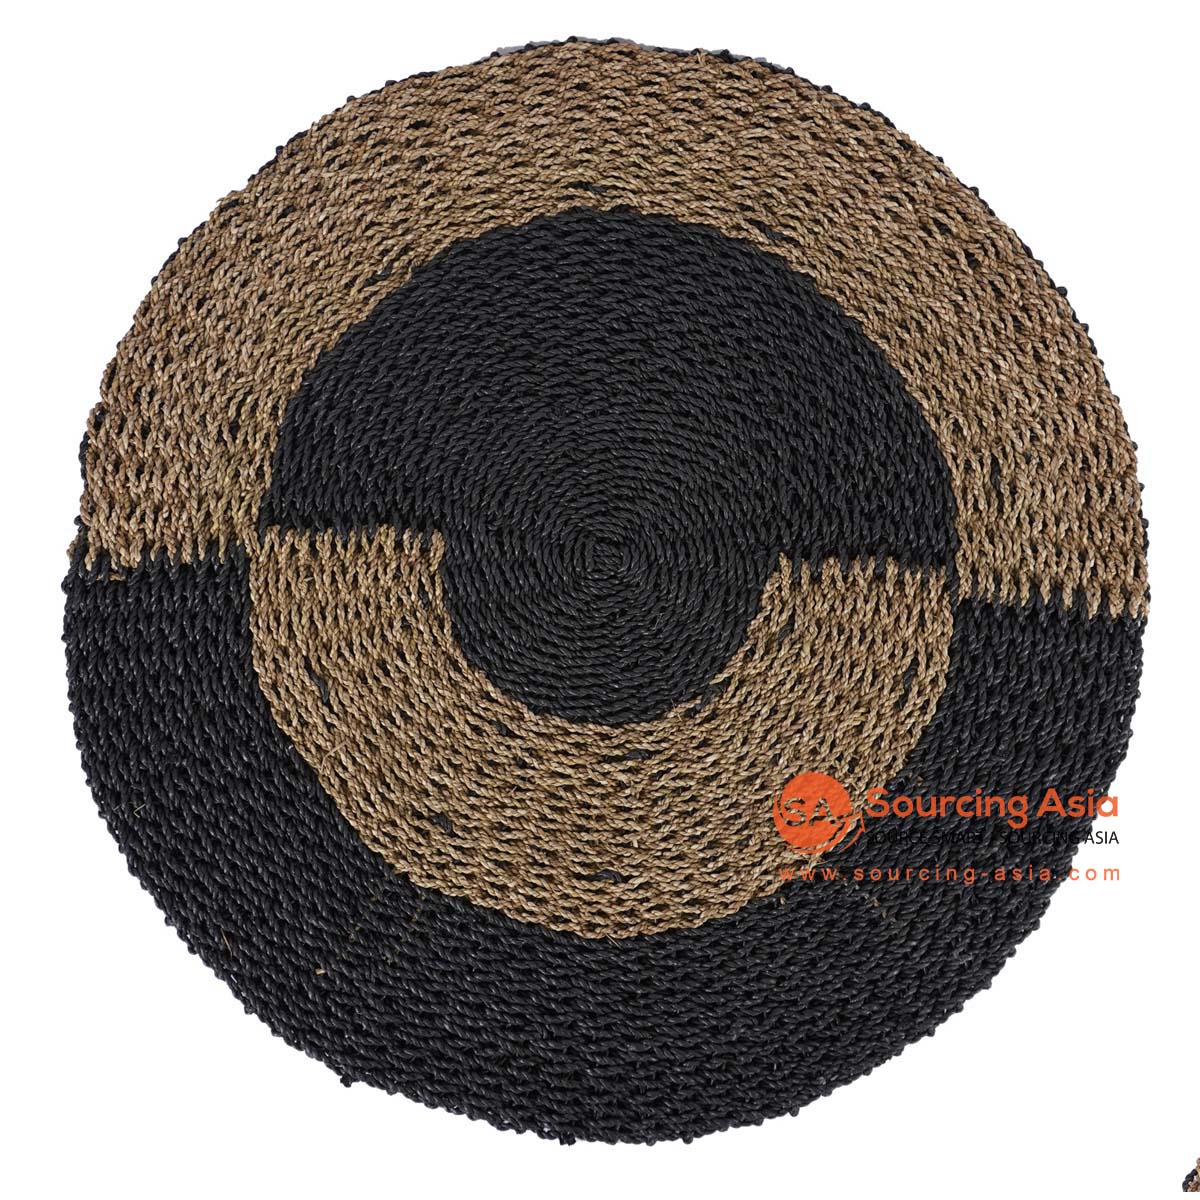 HBSC363 NATURAL AND BLACK SEAGRASS ROUND RUG